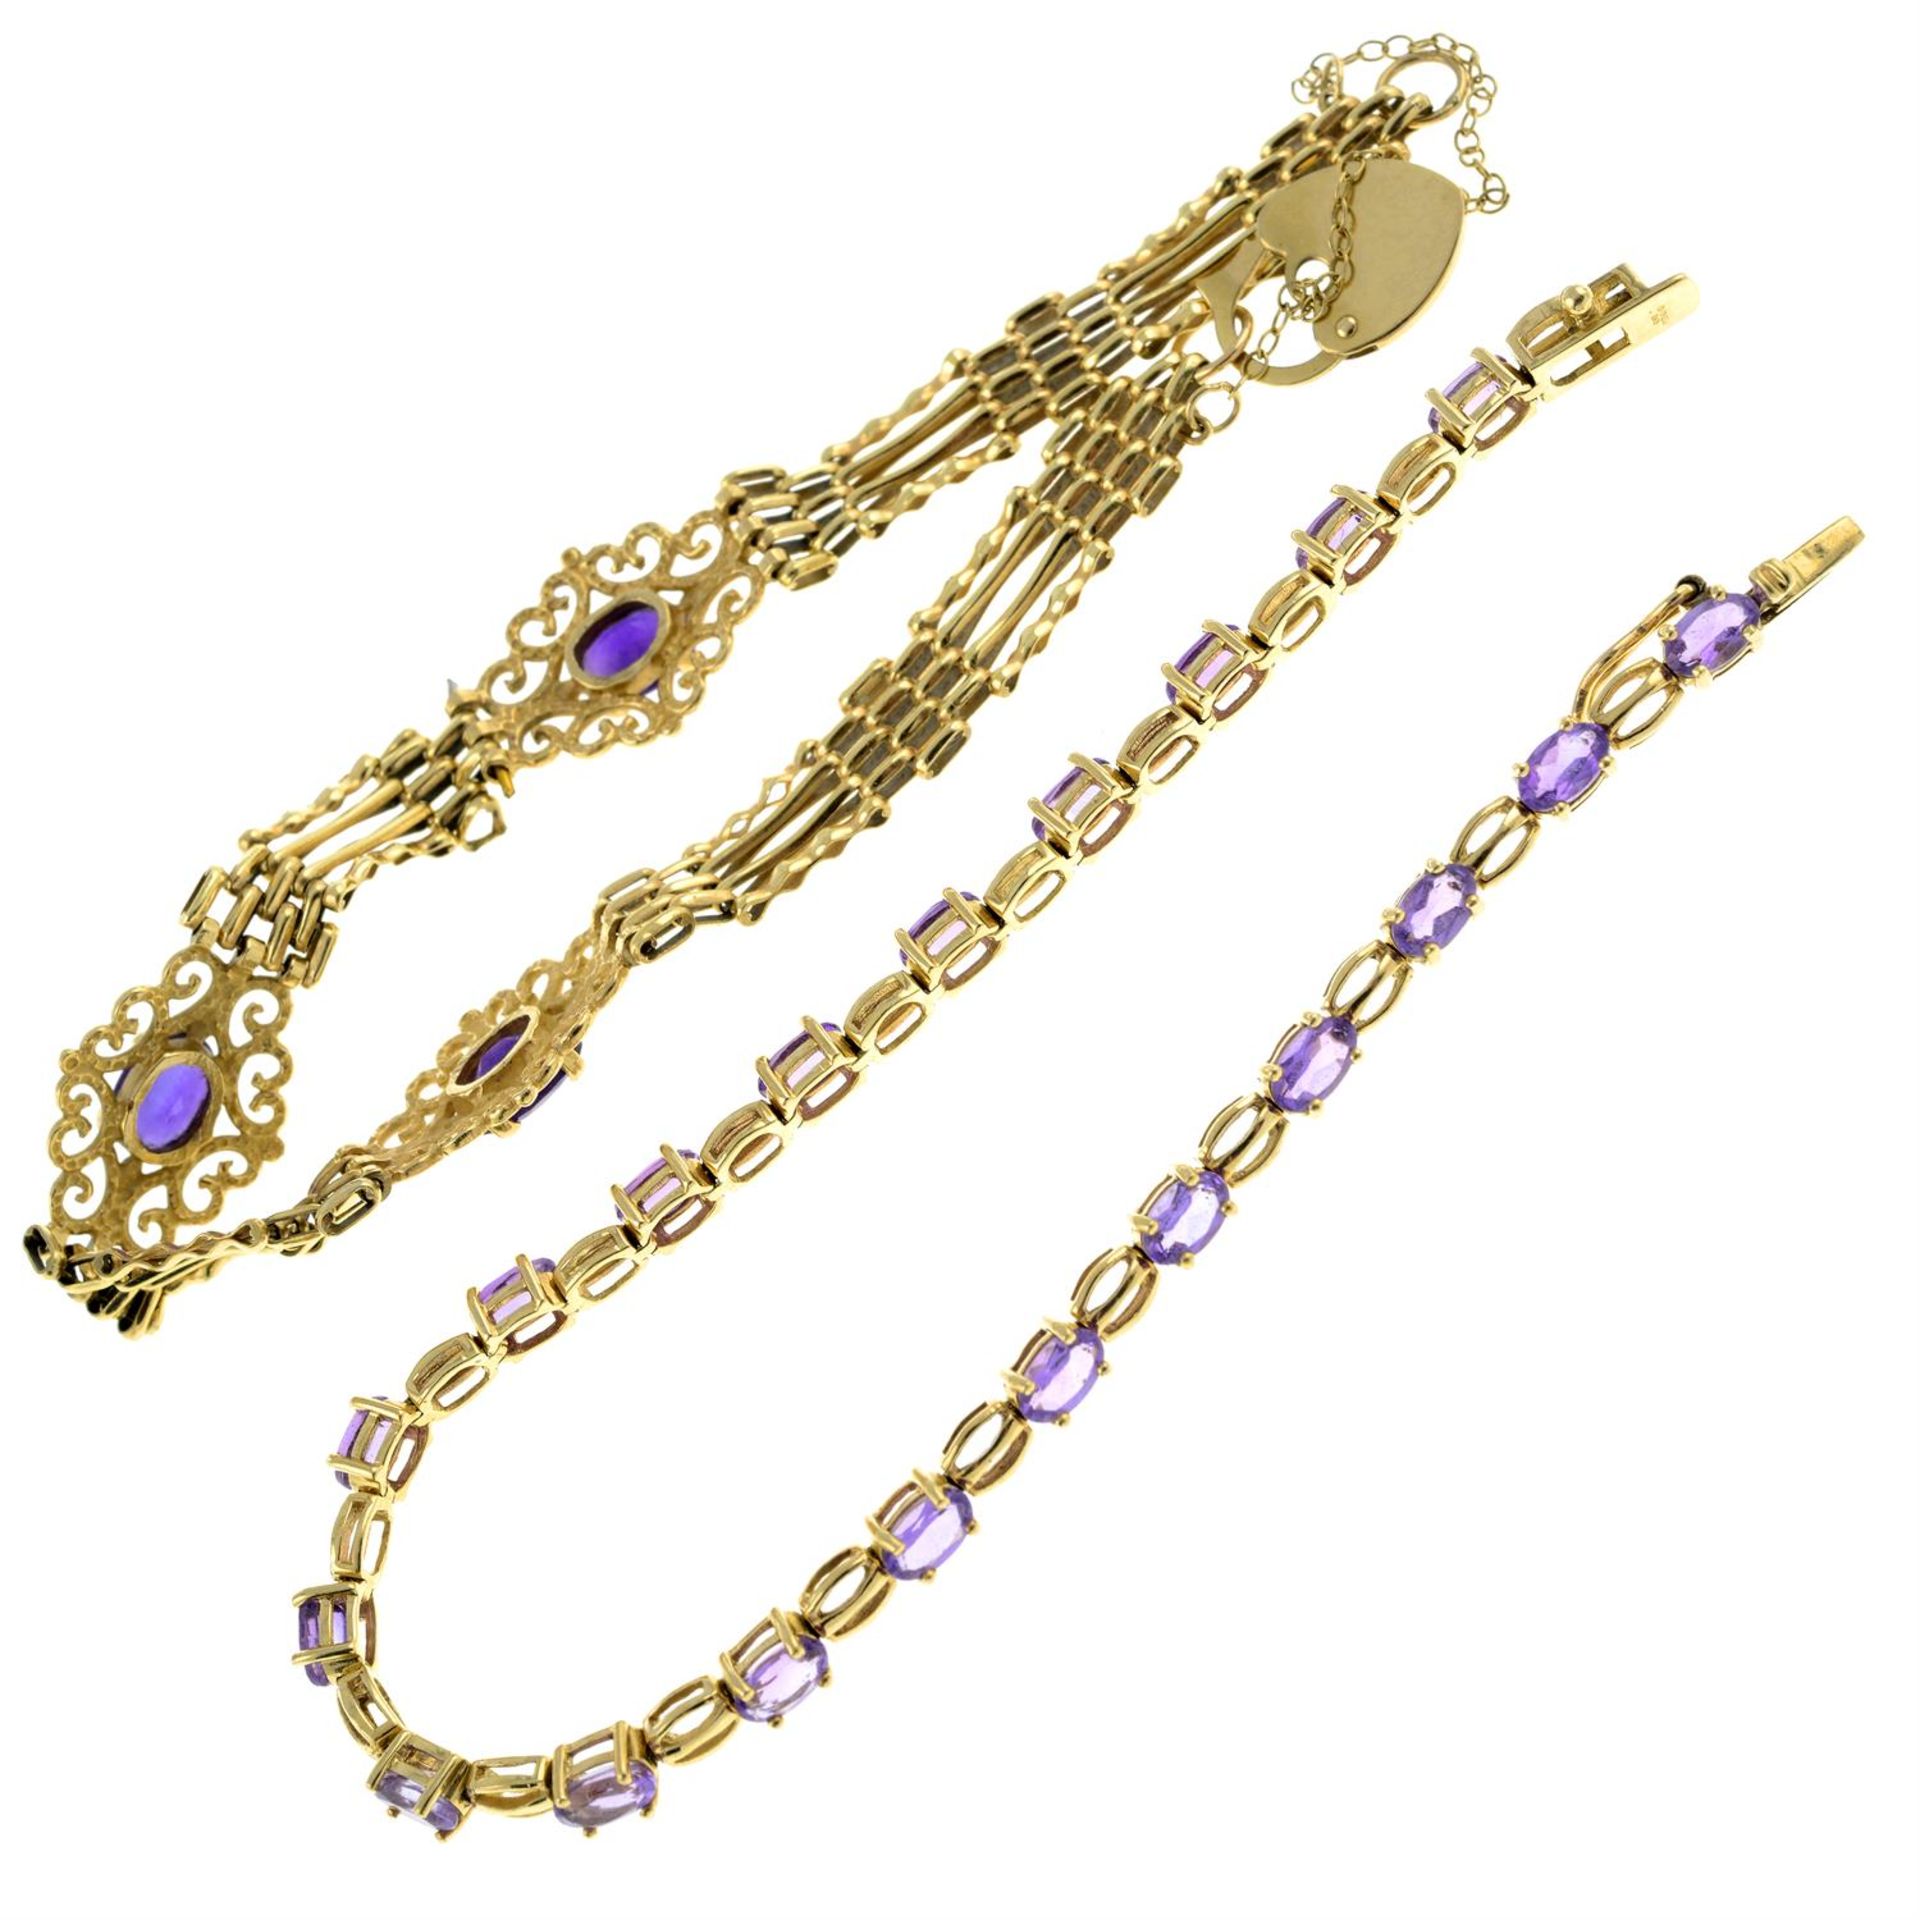 Two 9ct gold amethyst bracelets. - Image 2 of 2